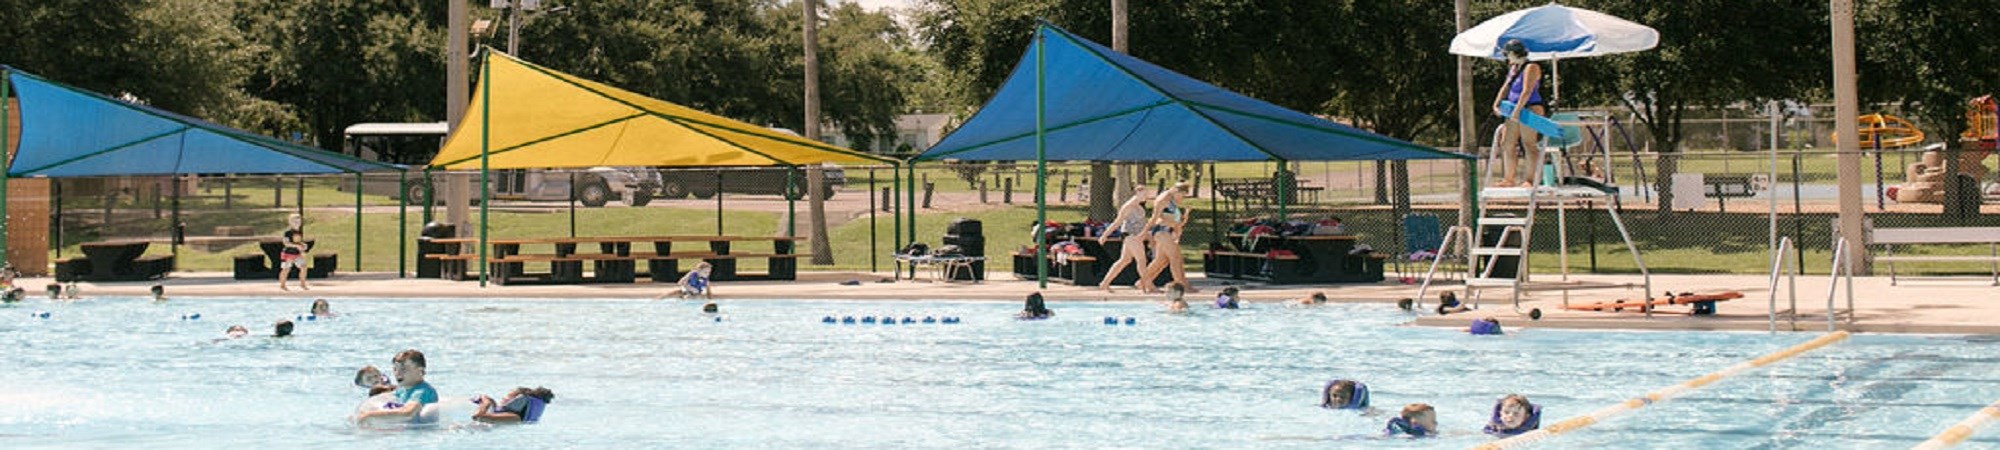 Photo of Simpson Park Pool with people spread out in the pool and a lifeguard in the background.